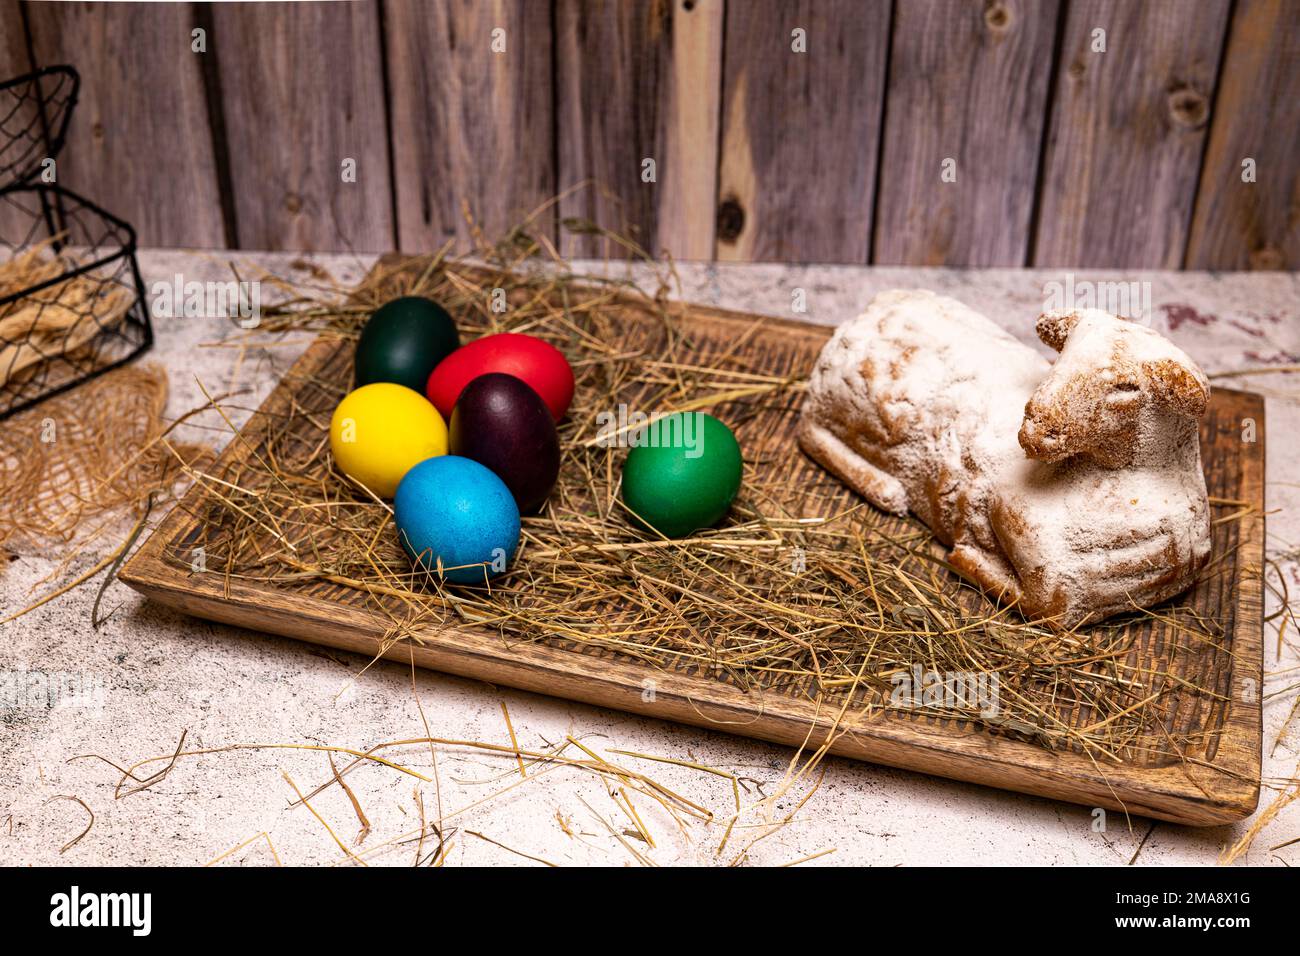 Easter lamb made of cake with colorful Easter eggs on straw, still life Stock Photo